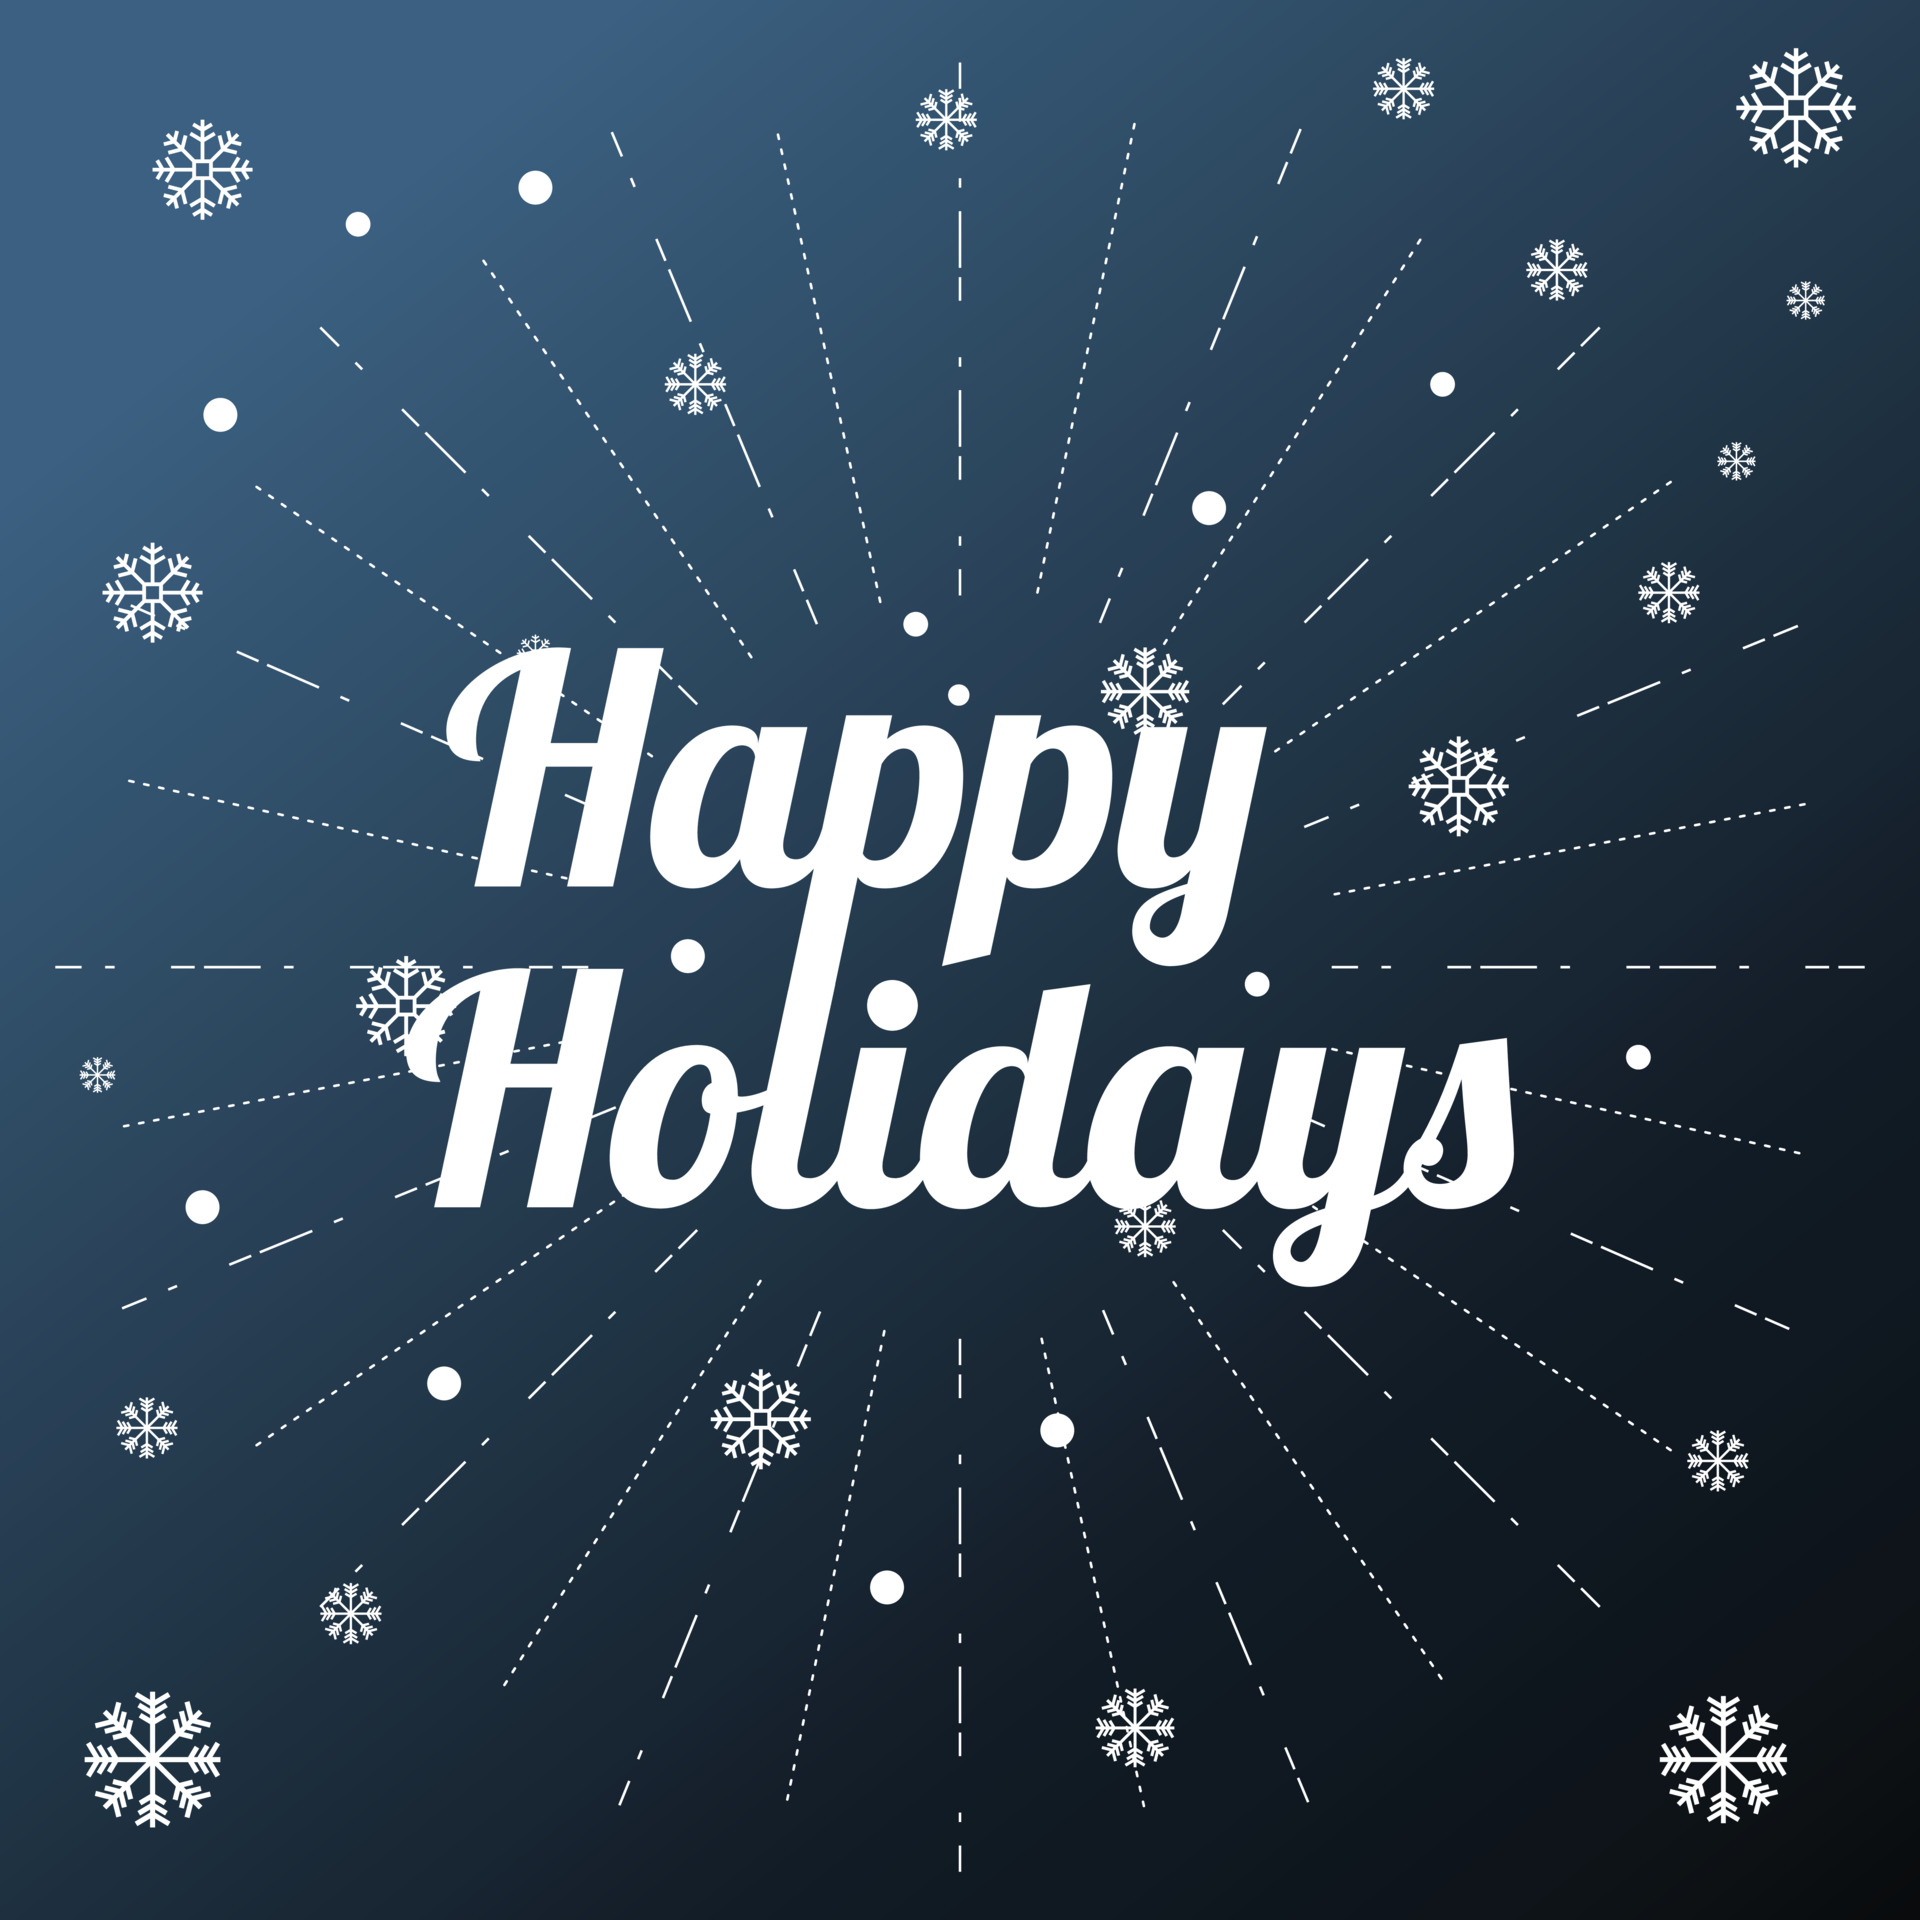 Happy Holidays in white text on a dark blue background with snowflakes